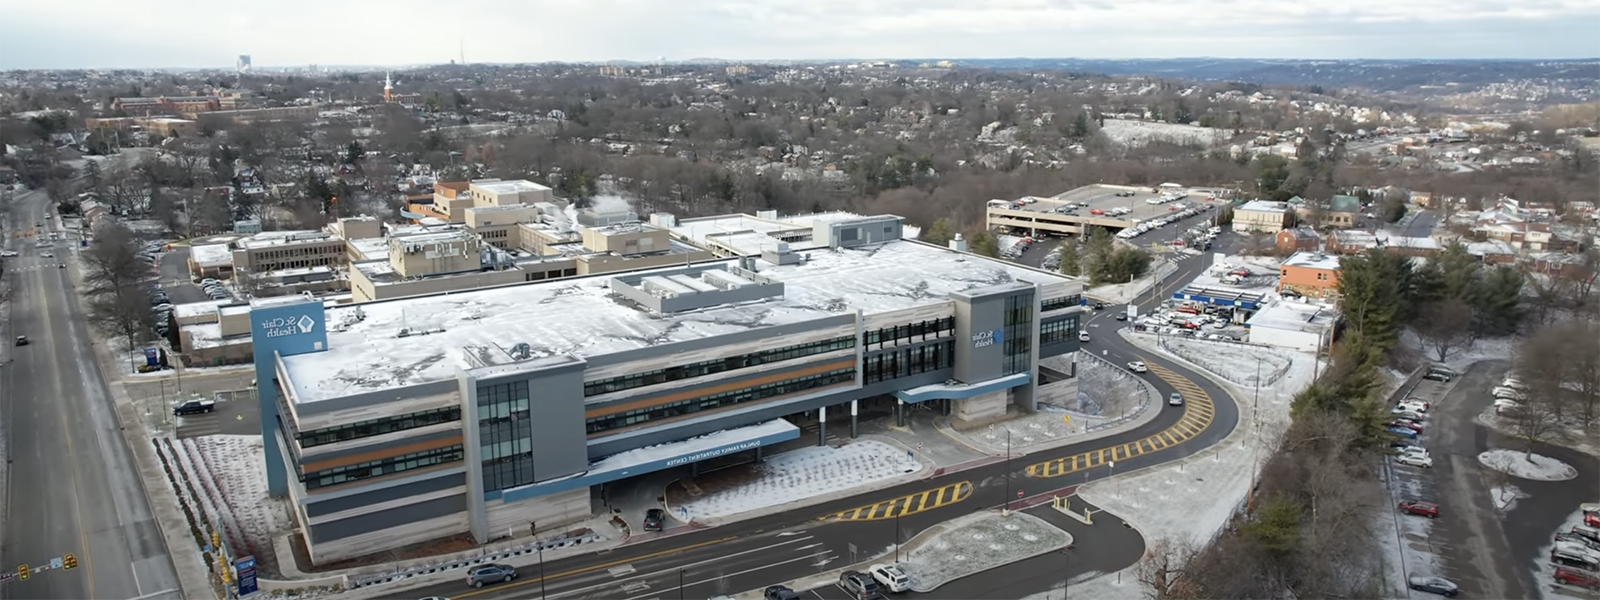 Aerial photo of a building and parking lot in winter